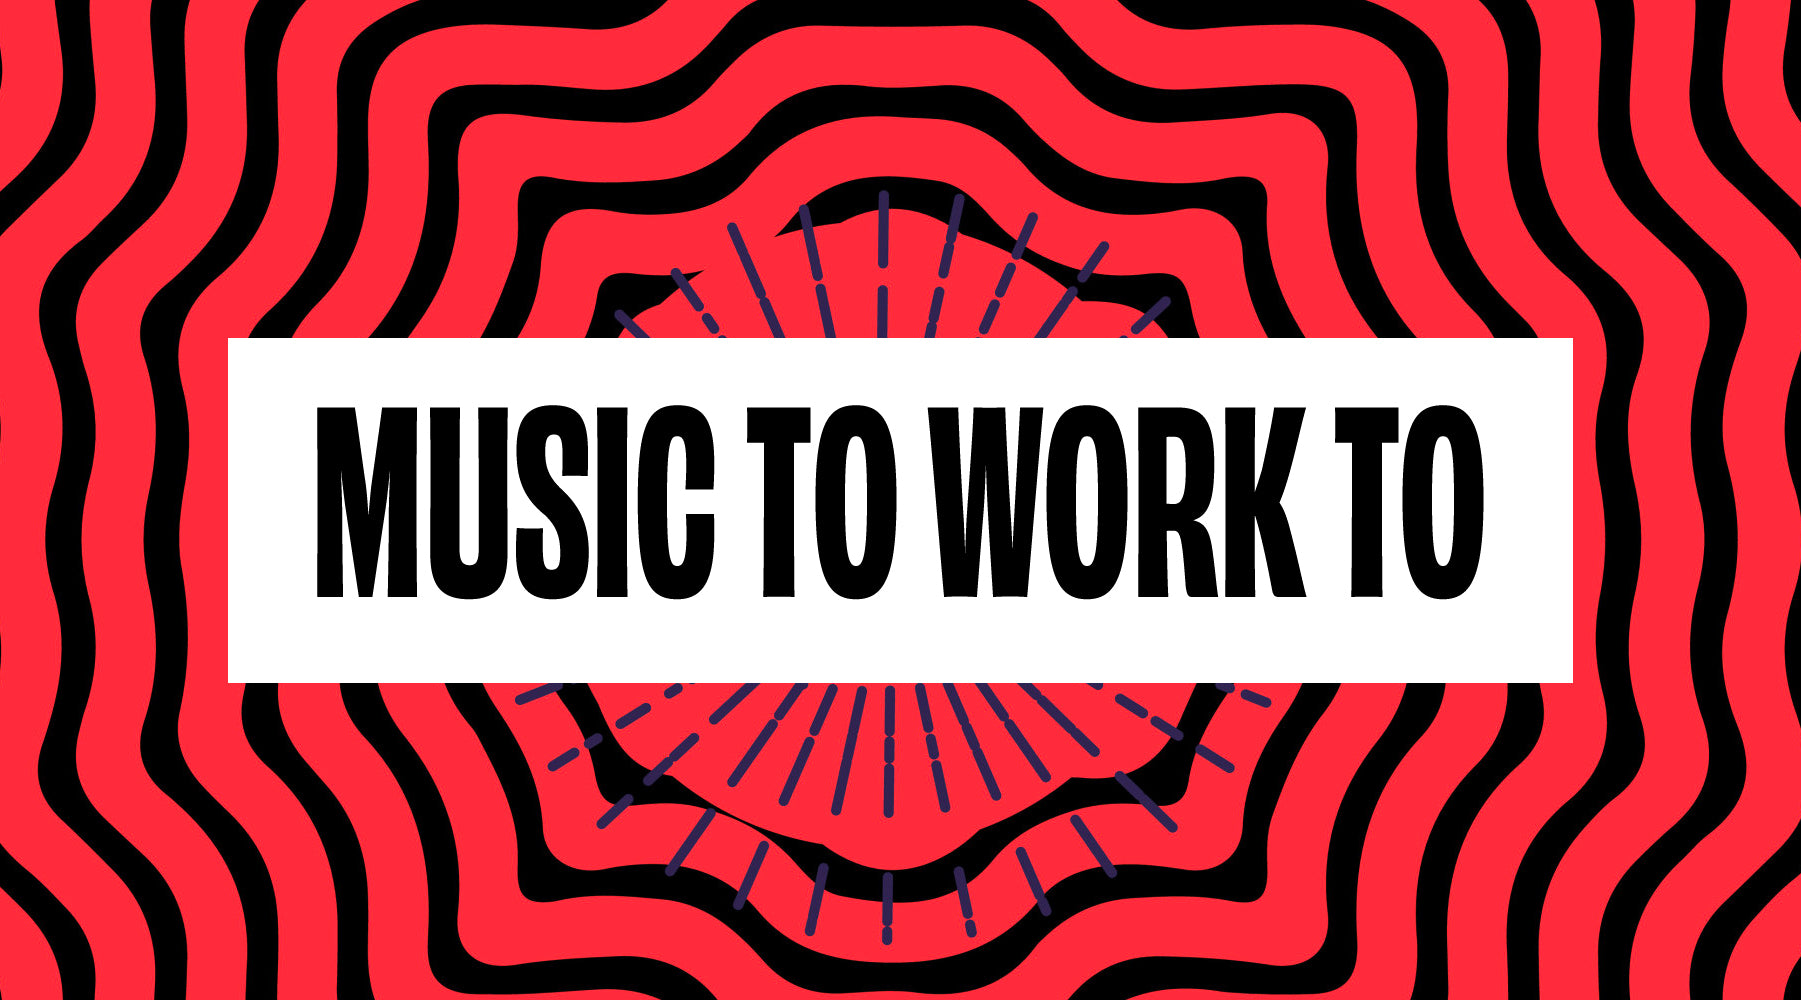 Music to work to - Psychedelic Elevator